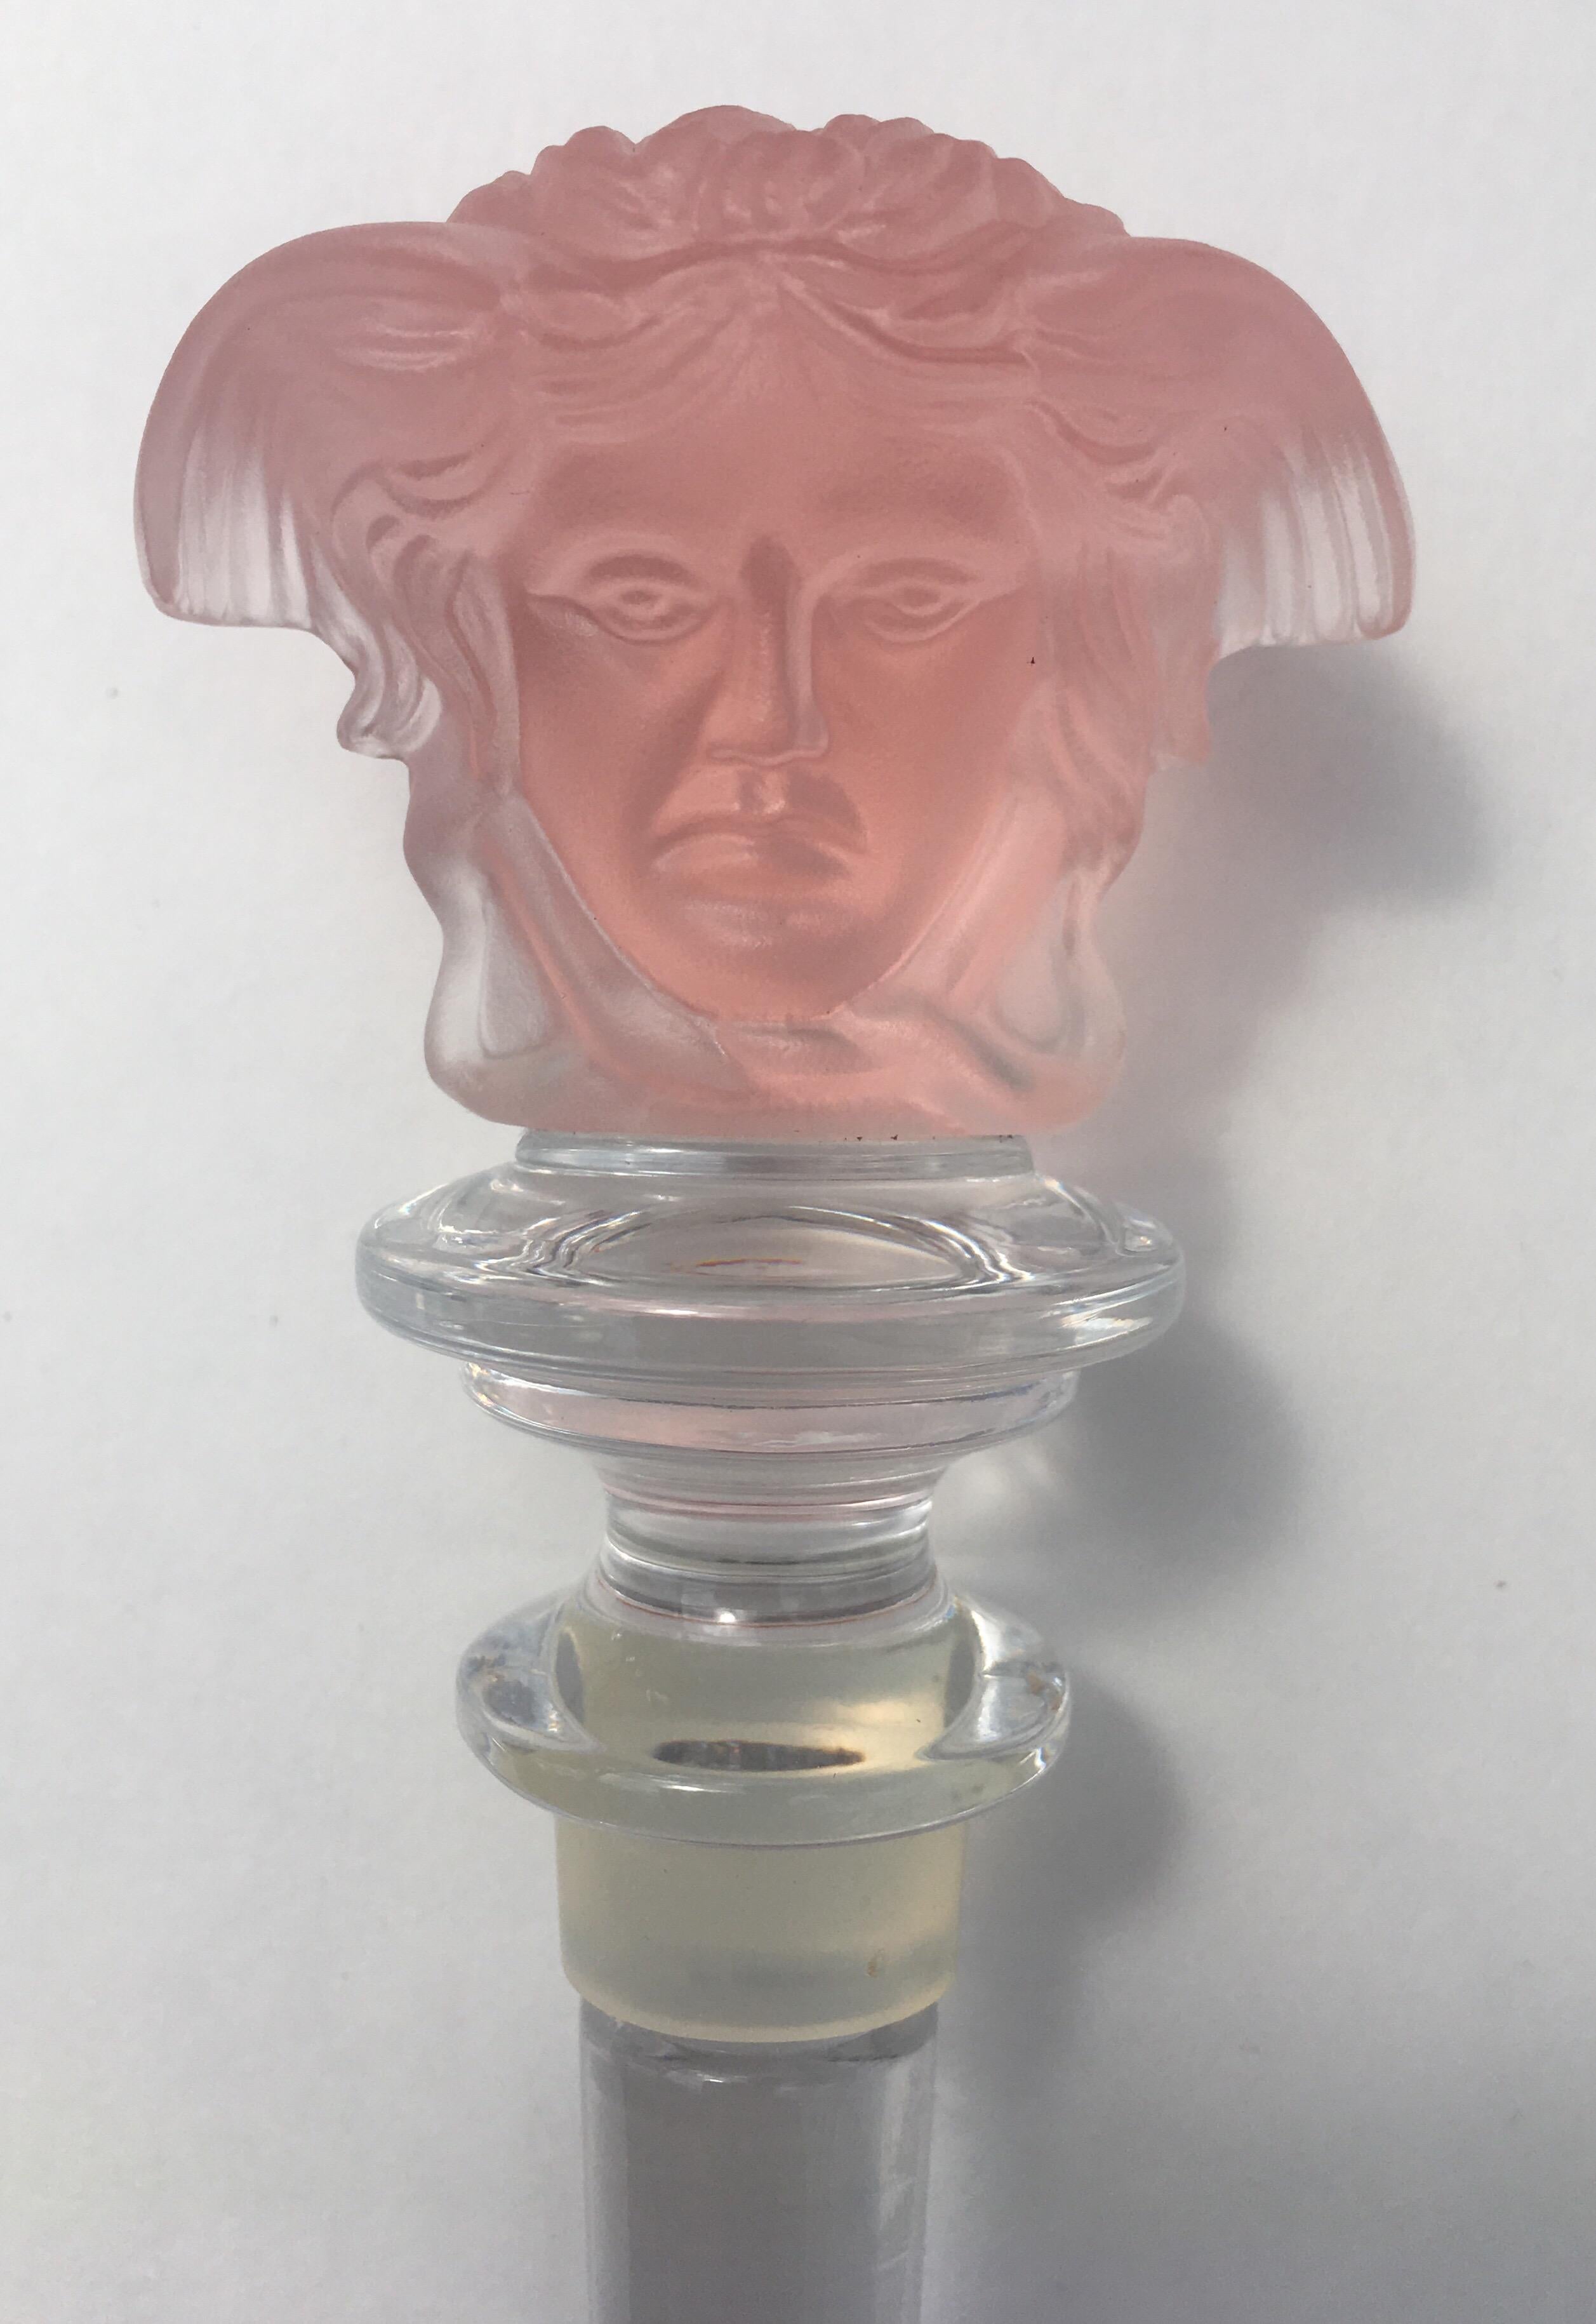 Etched carved pale rose/pink crystal wine decanter stopper by Versace for Rosenthal. Iconic Versace Medusa head on both sides of stopper. Original black and gold Greek key motif box. This beautiful bar accessory is marked “Rosenthal” “Versace”. Made